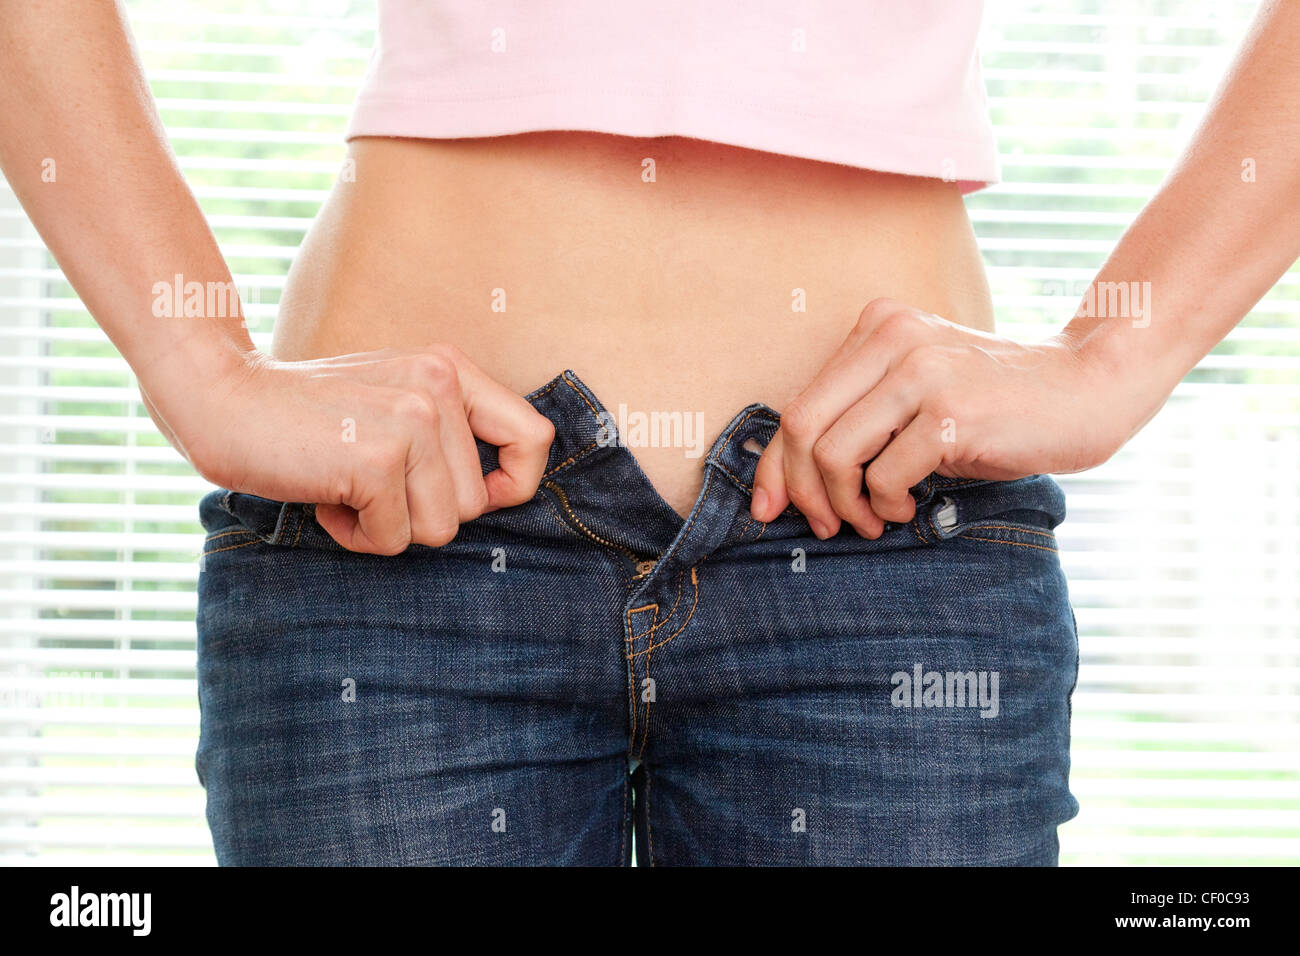 Badly Fitting Clothes High Resolution Stock Photography and Images - Alamy